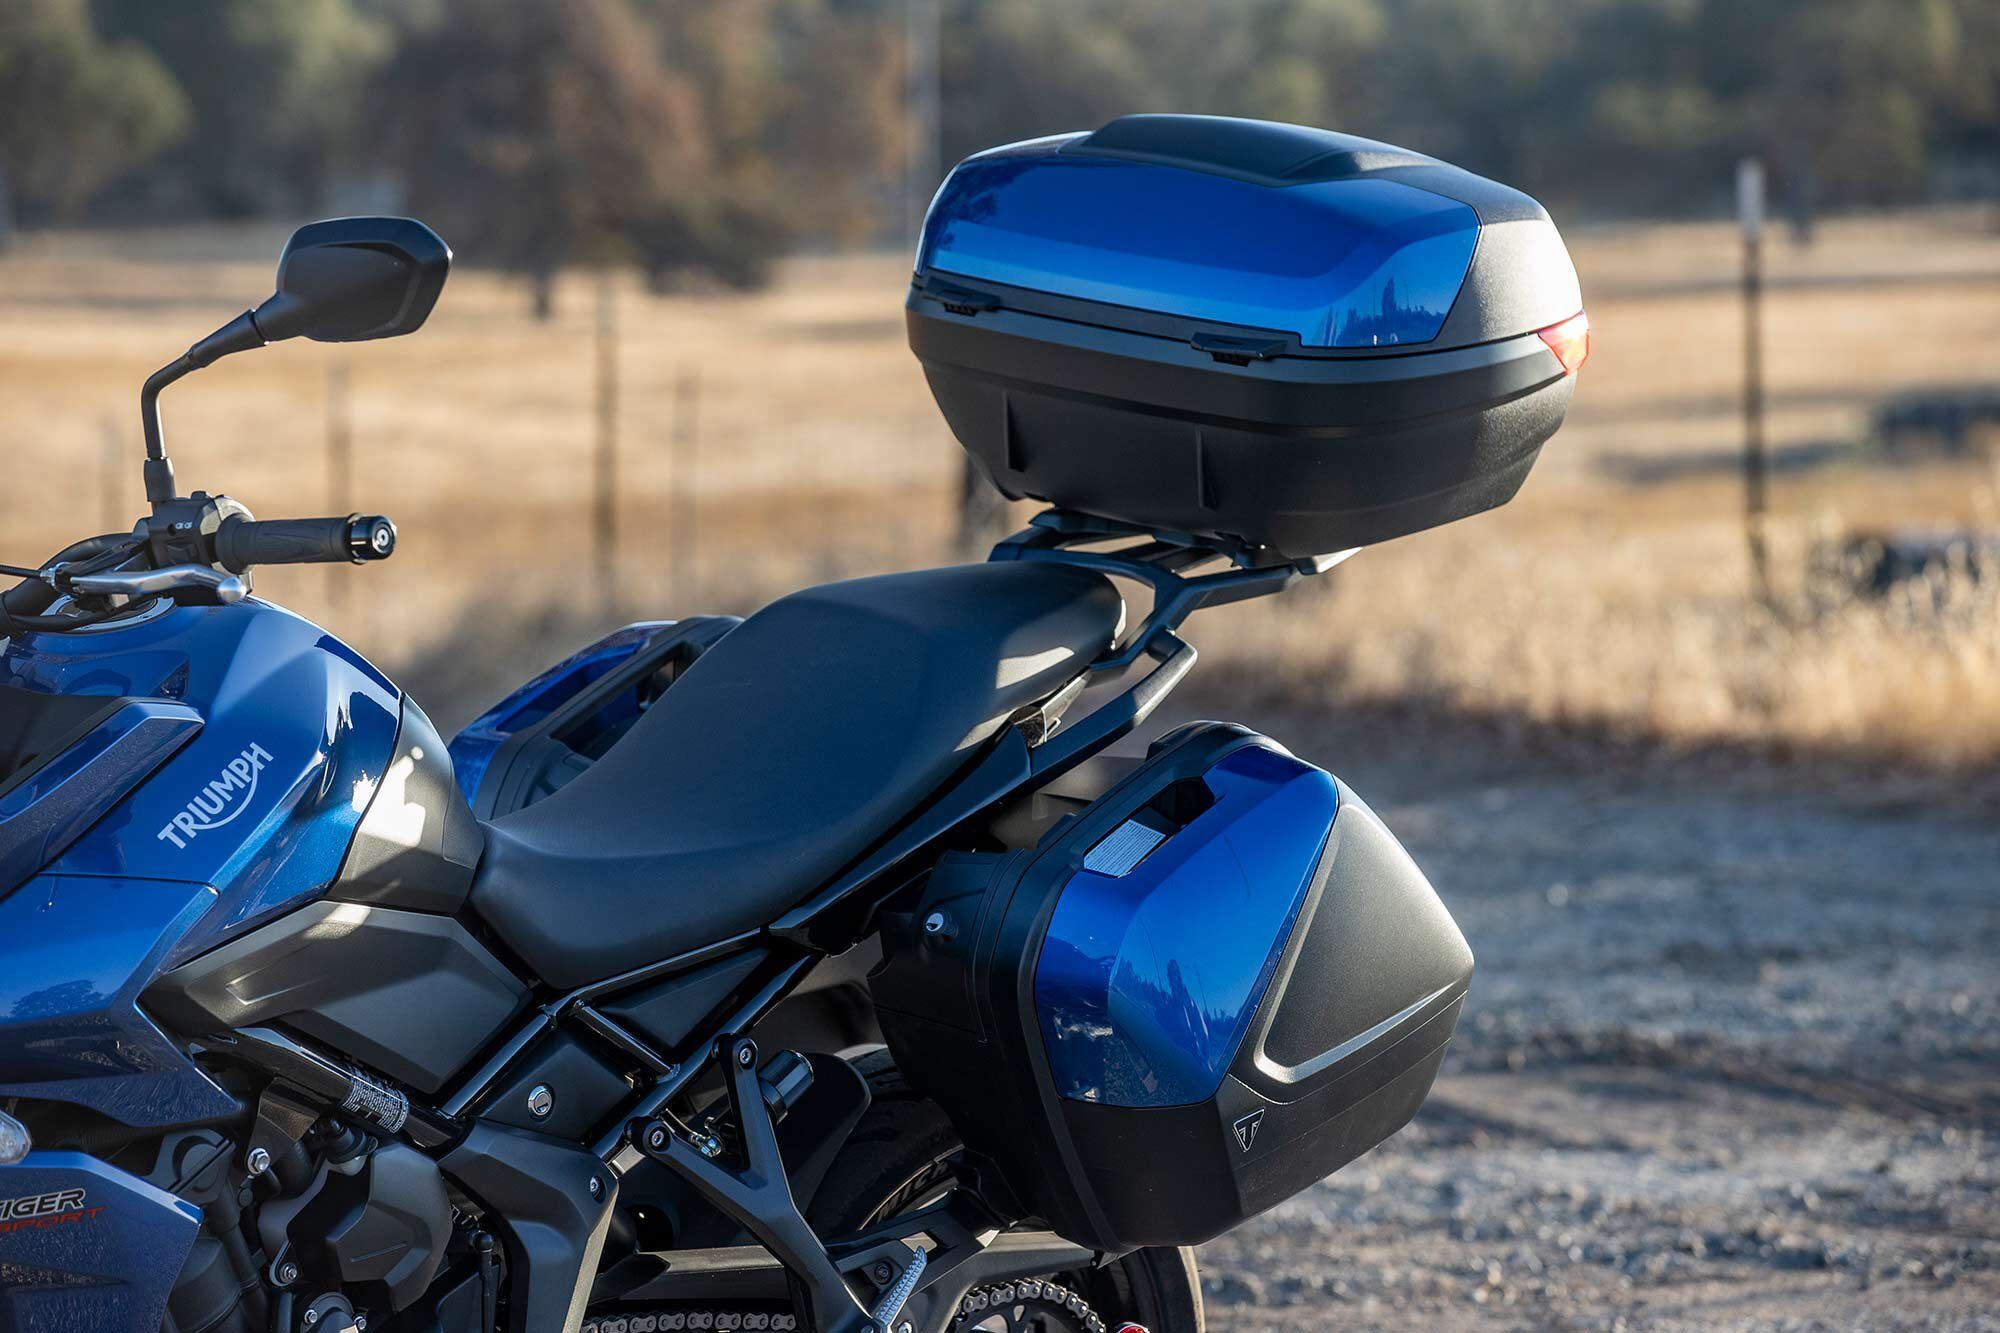 Important to consider is that the Tiger Sport 660 does not come standard with luggage. The accessory panniers offer a total of 57 liters of storage, while the accessory top box offers an additional 46.9 liters of luggage capacity.